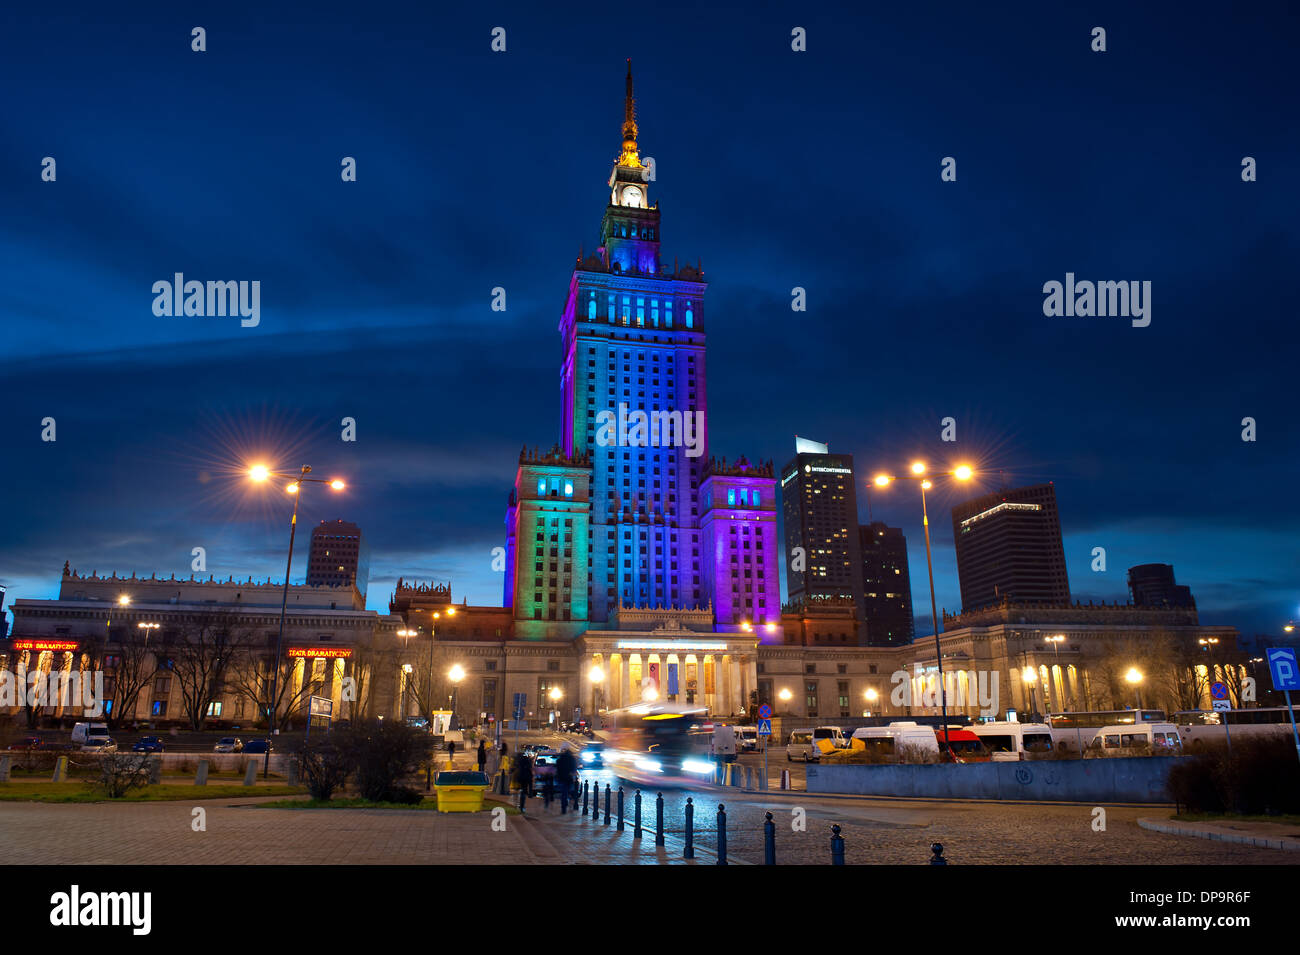 Palace of Culture and Science in rainbow colors Stock Photo